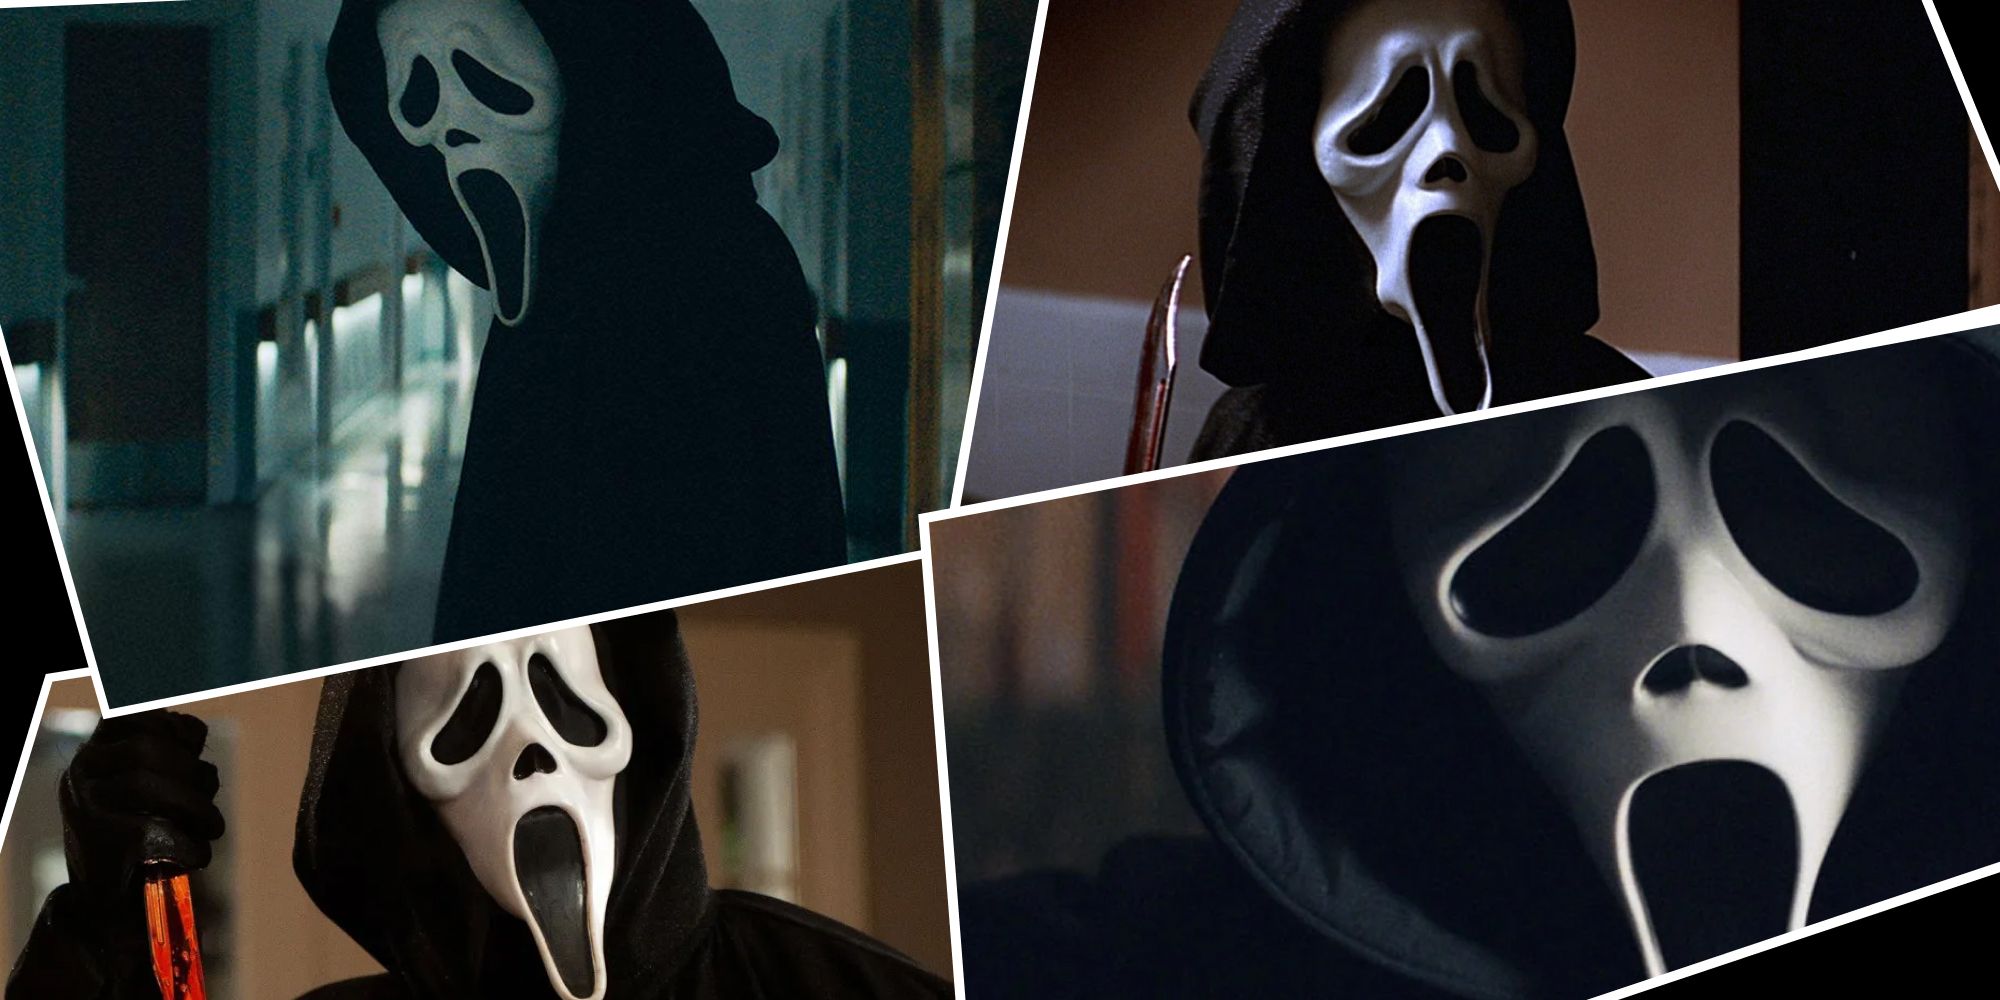 Ghostface Killers From Scream Franchise